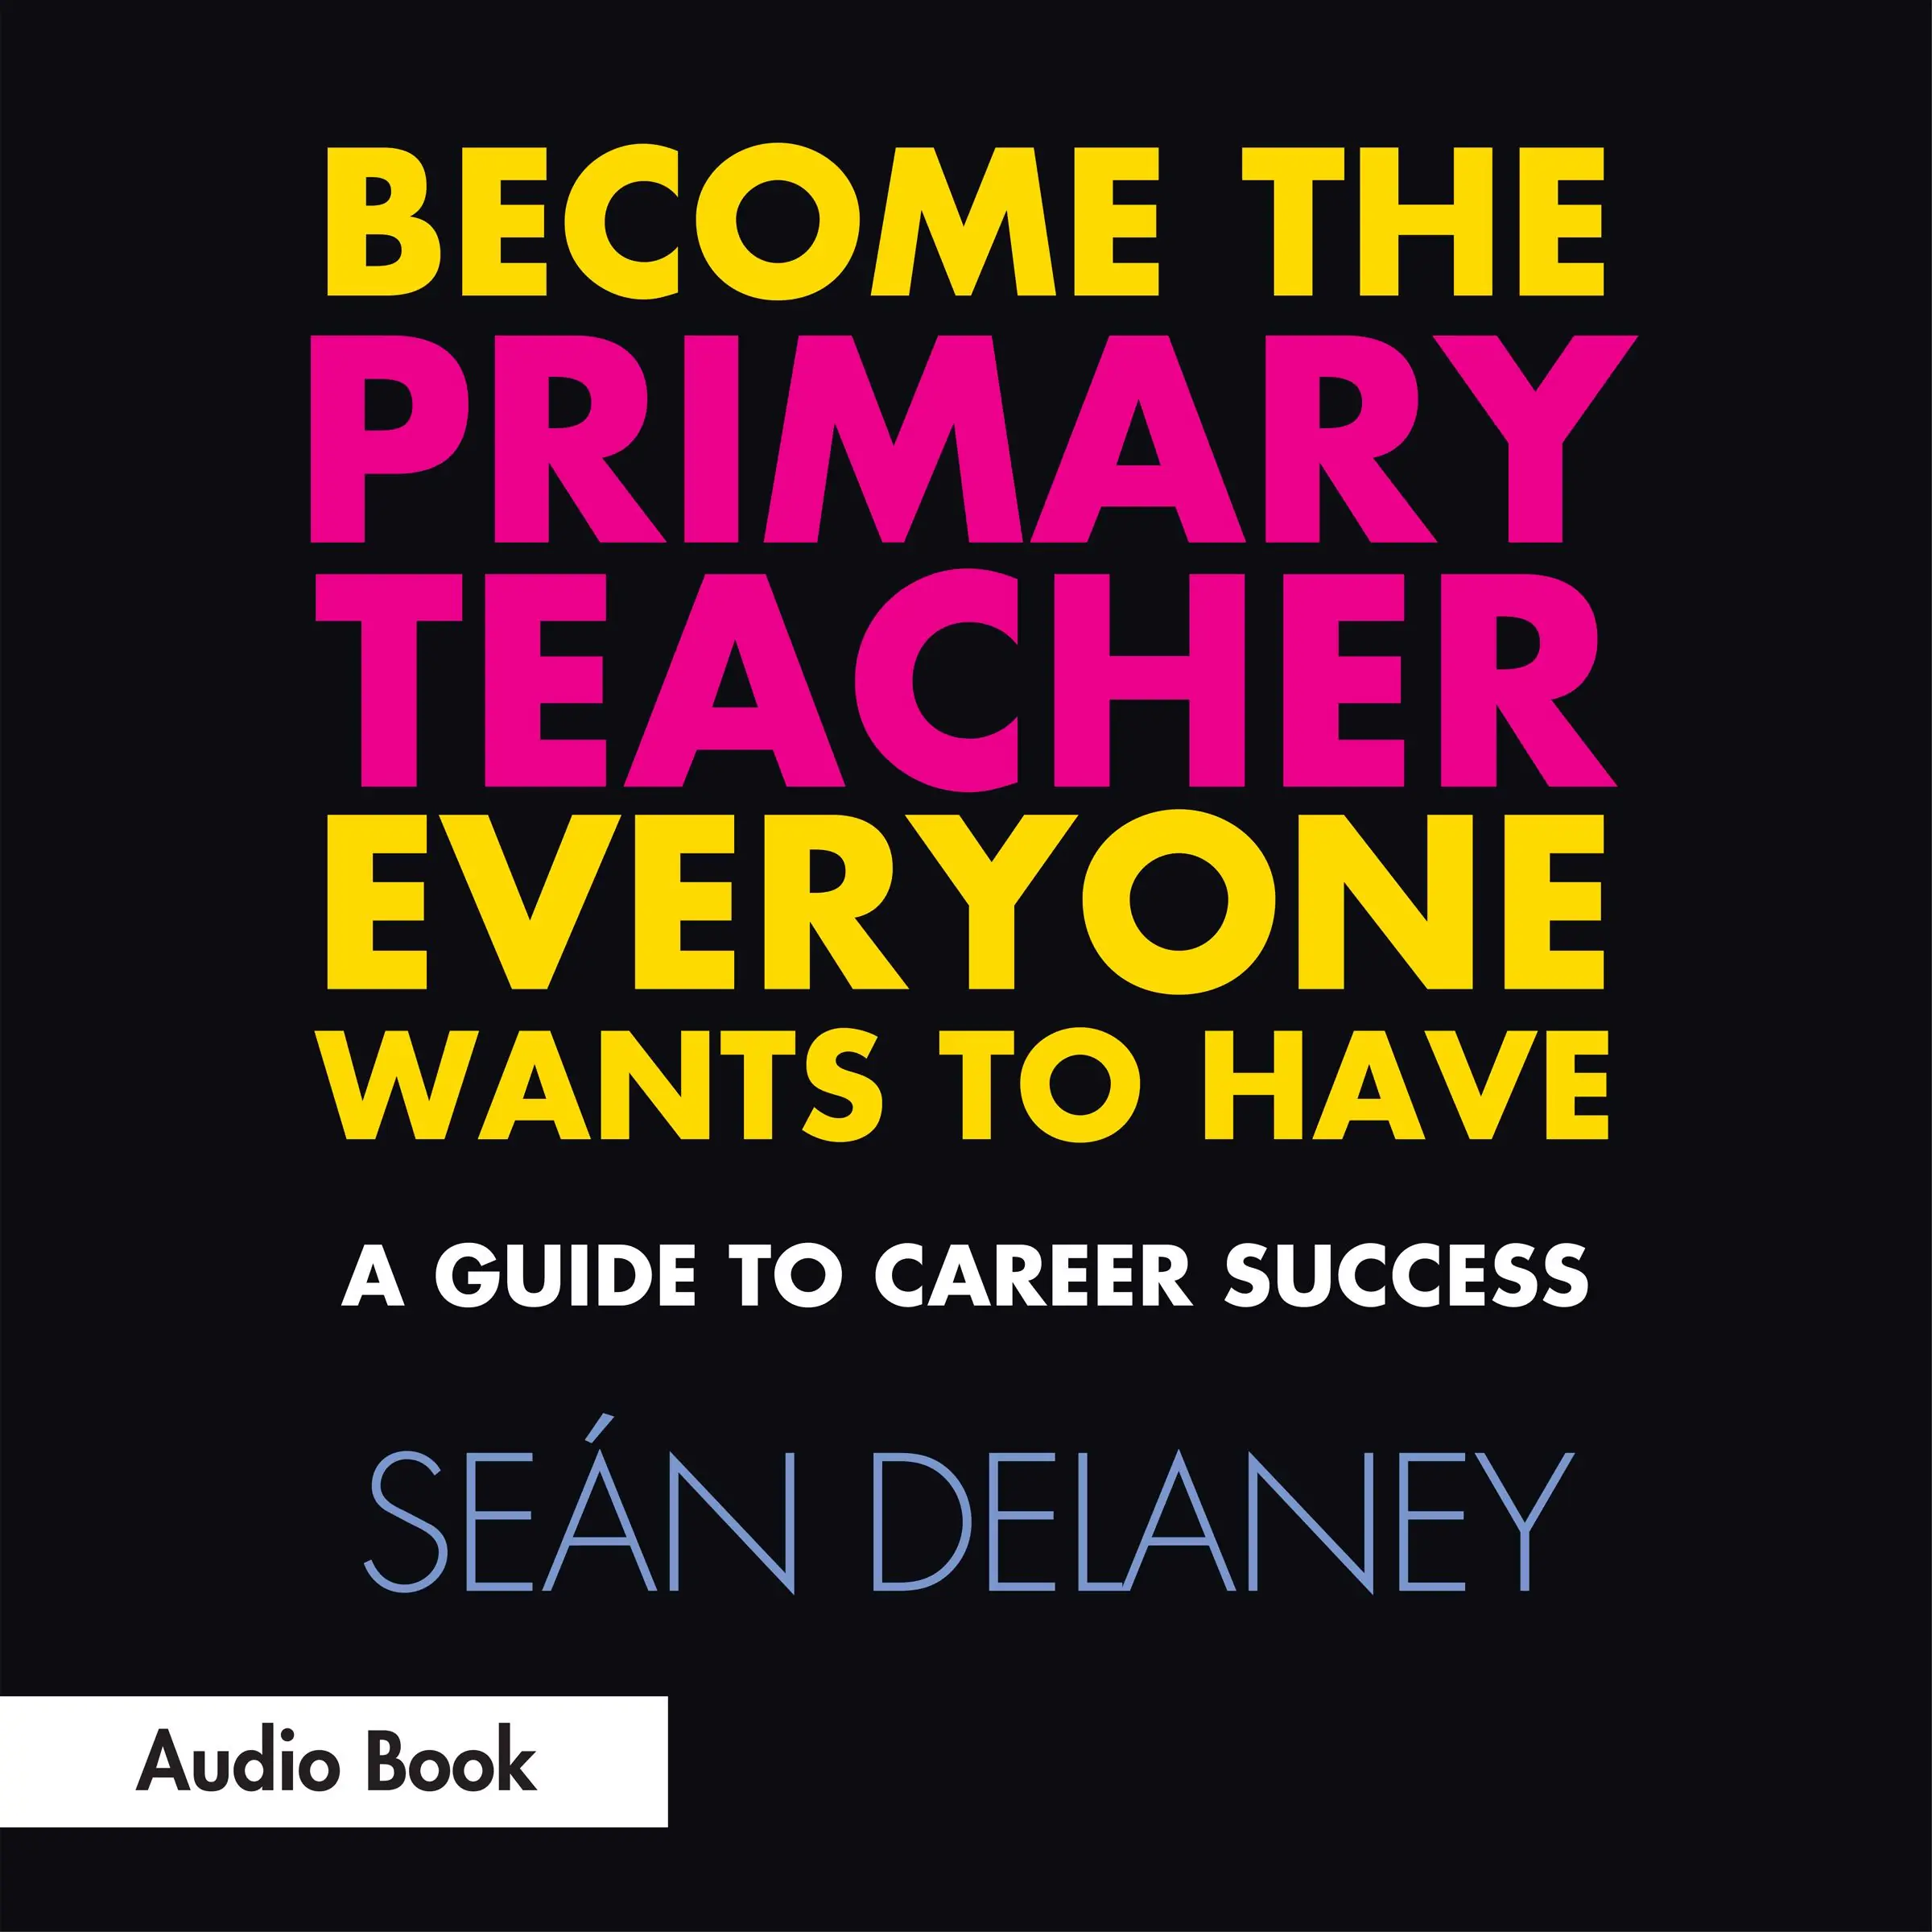 Become the Primary Teacher Everyone Wants to Have: A Guide to Career Success Audiobook by Seán Delaney